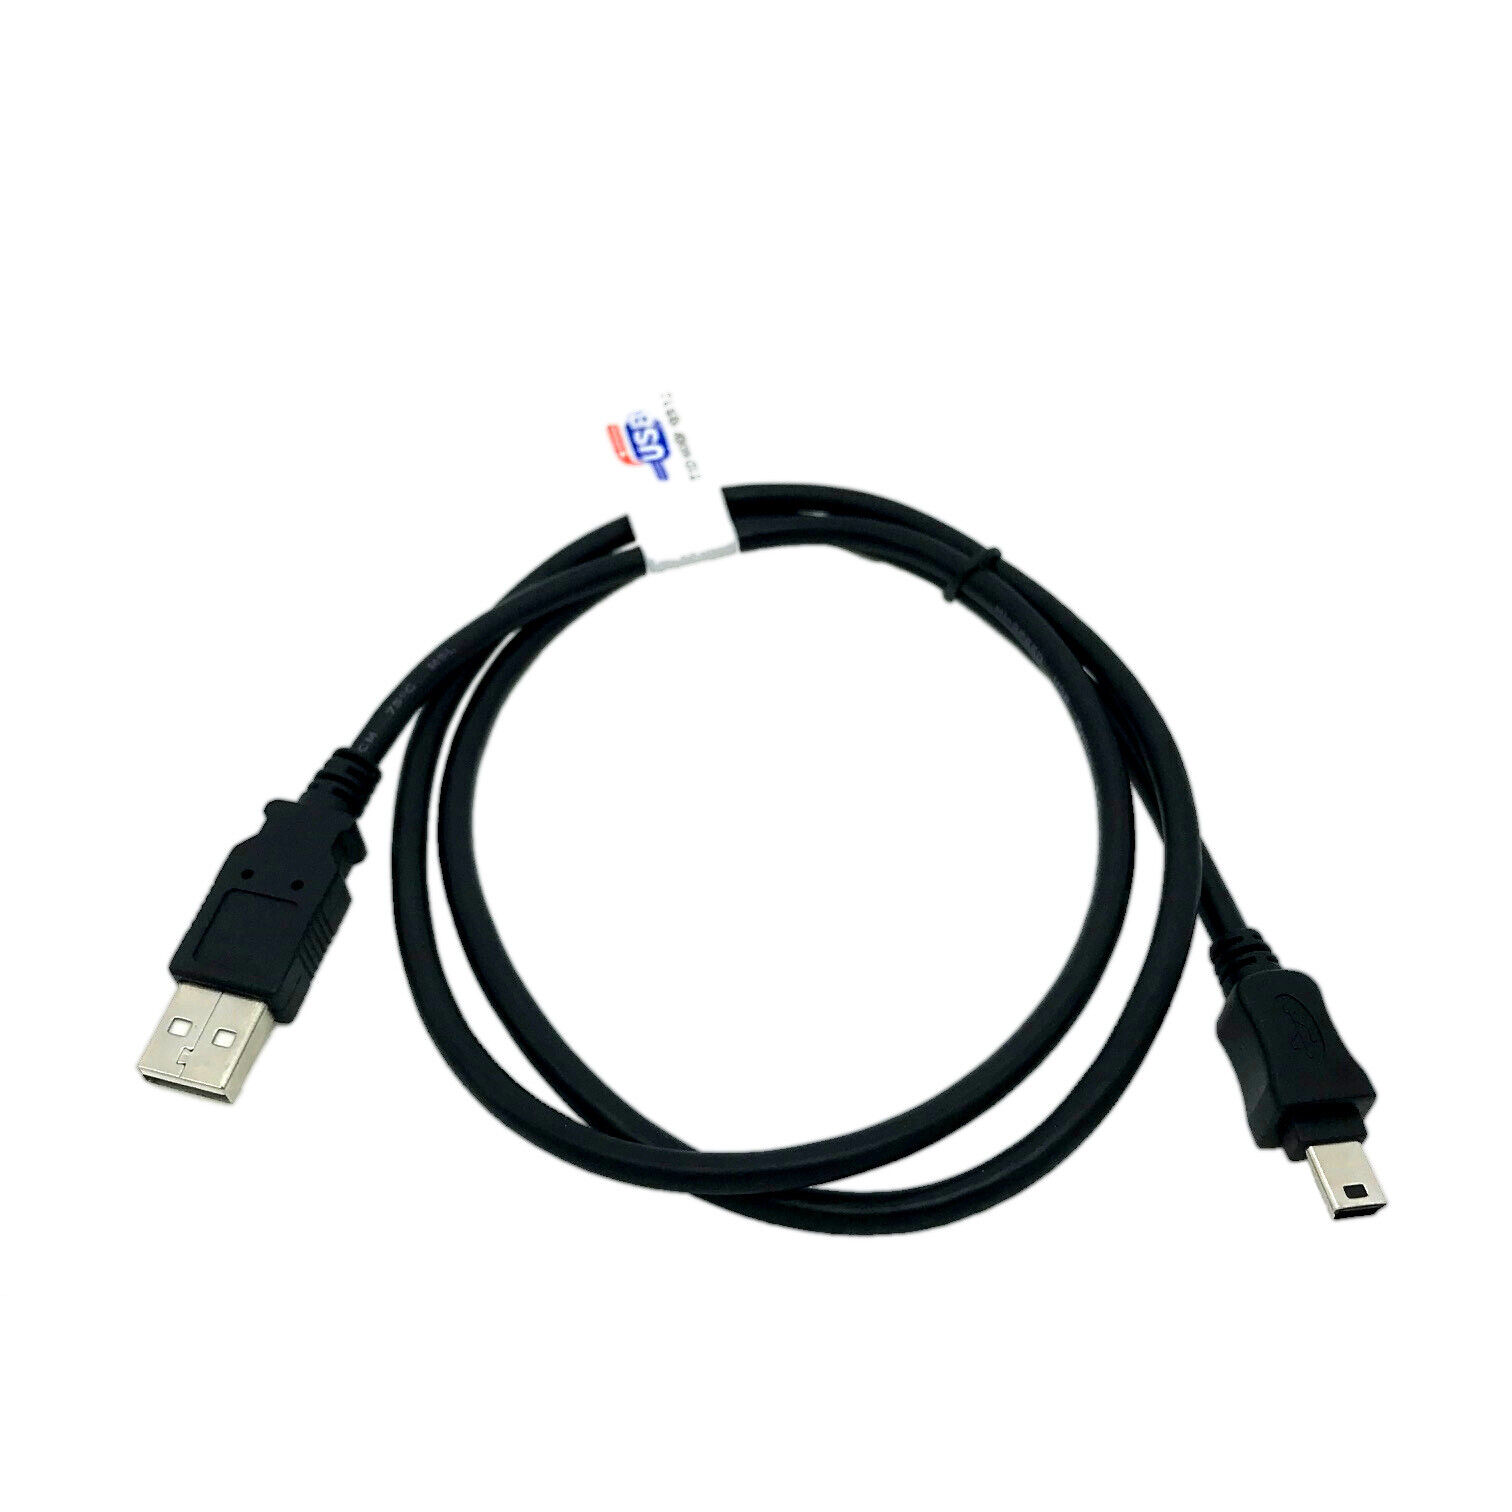 USB SYNC DATA to PC Charger Charging Cable for GOPRO HERO3 HERO3+ HERO4 3'